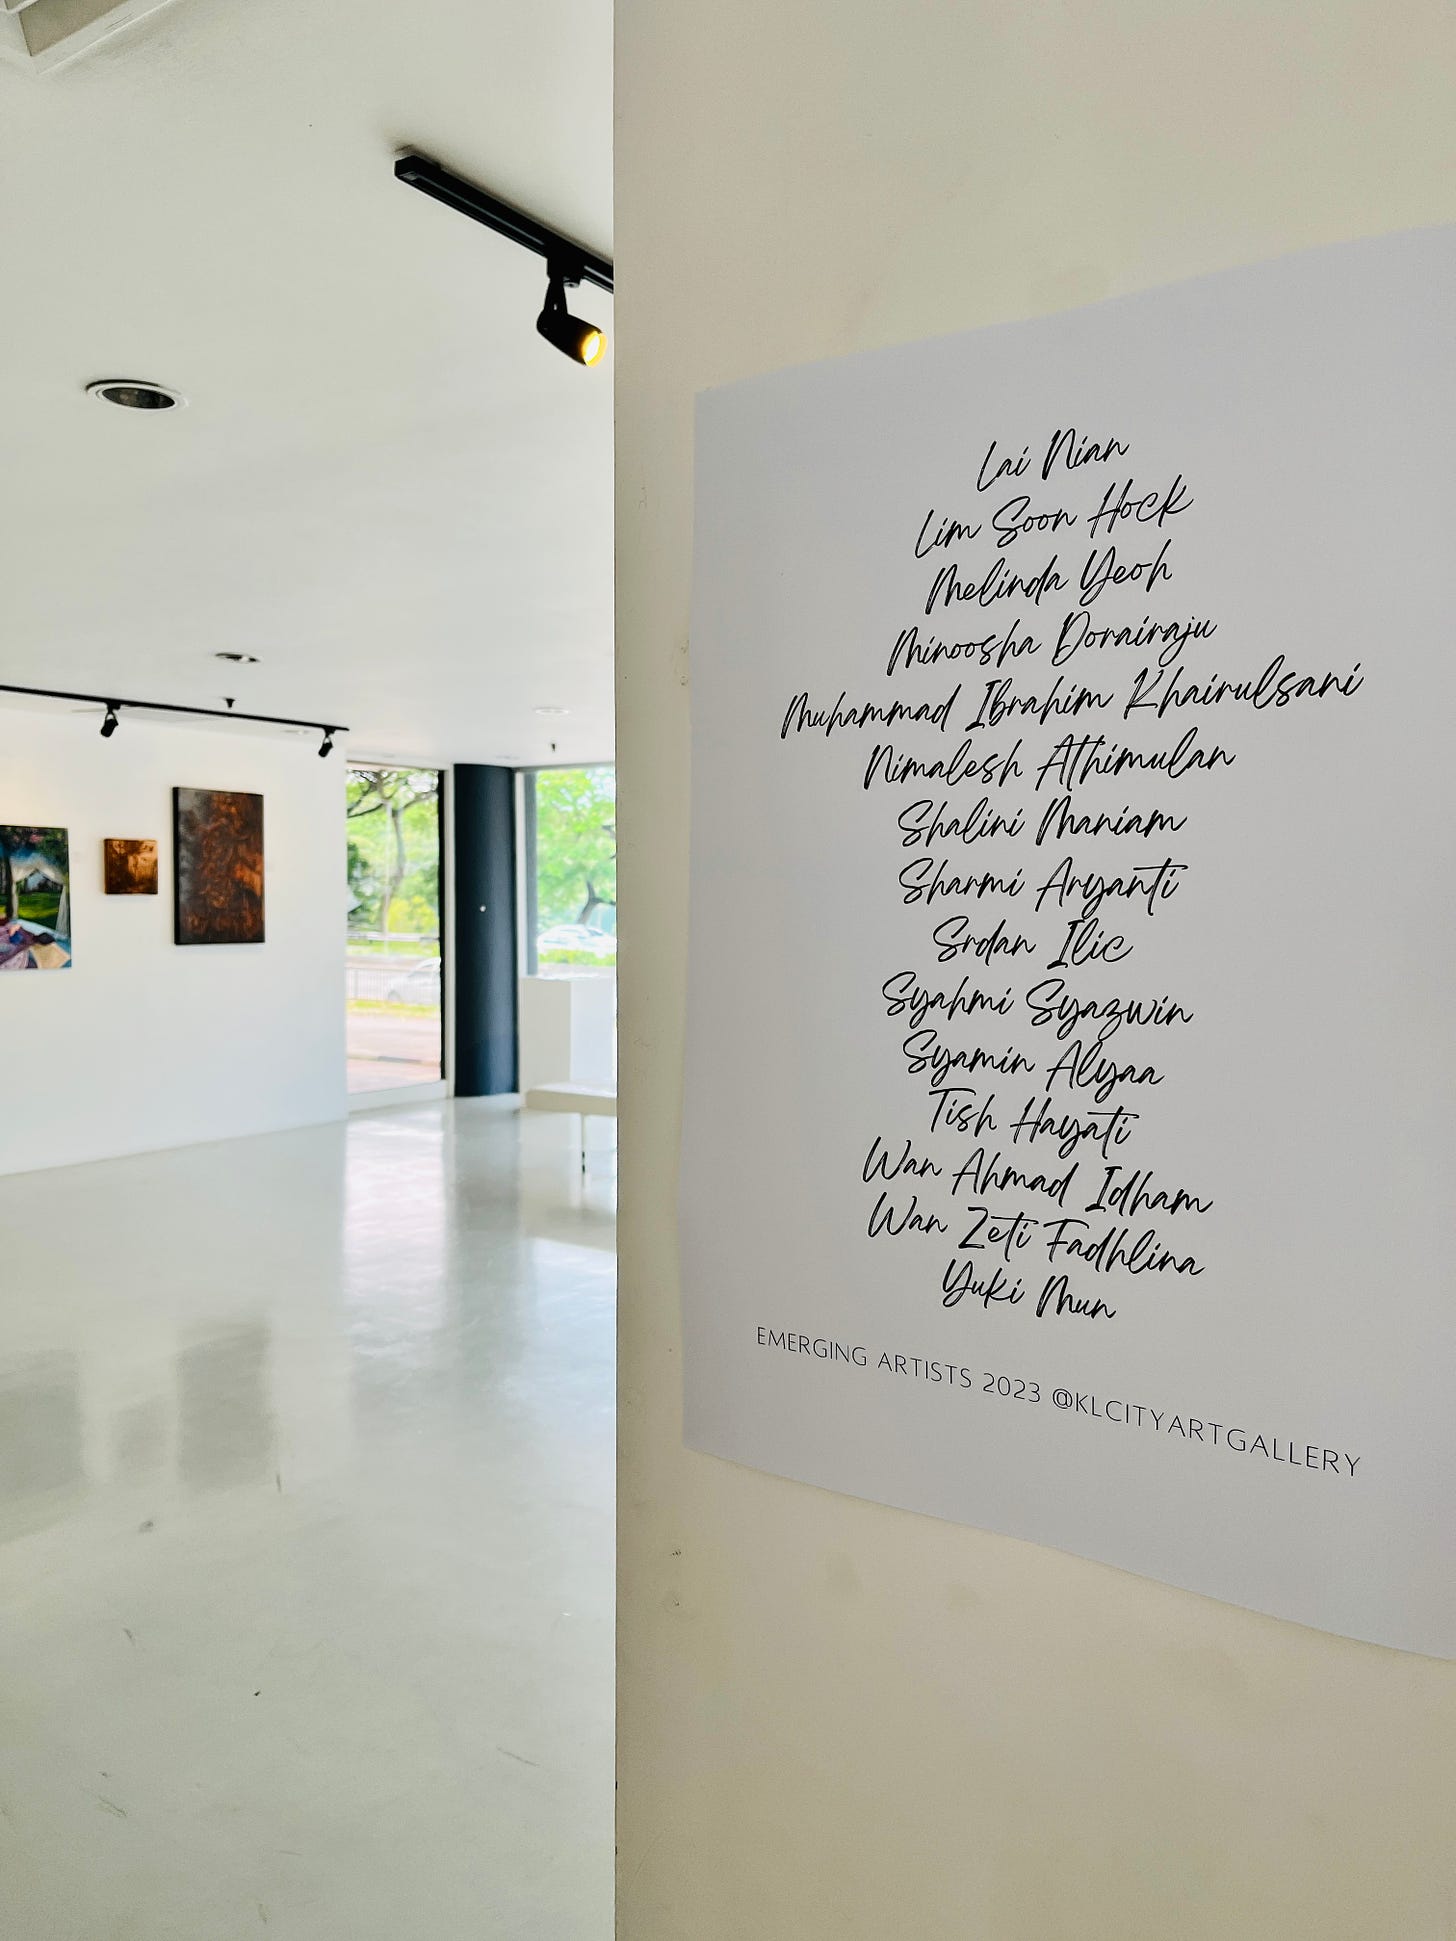 image: a list of the artists' name printed and displayed in the gallery.